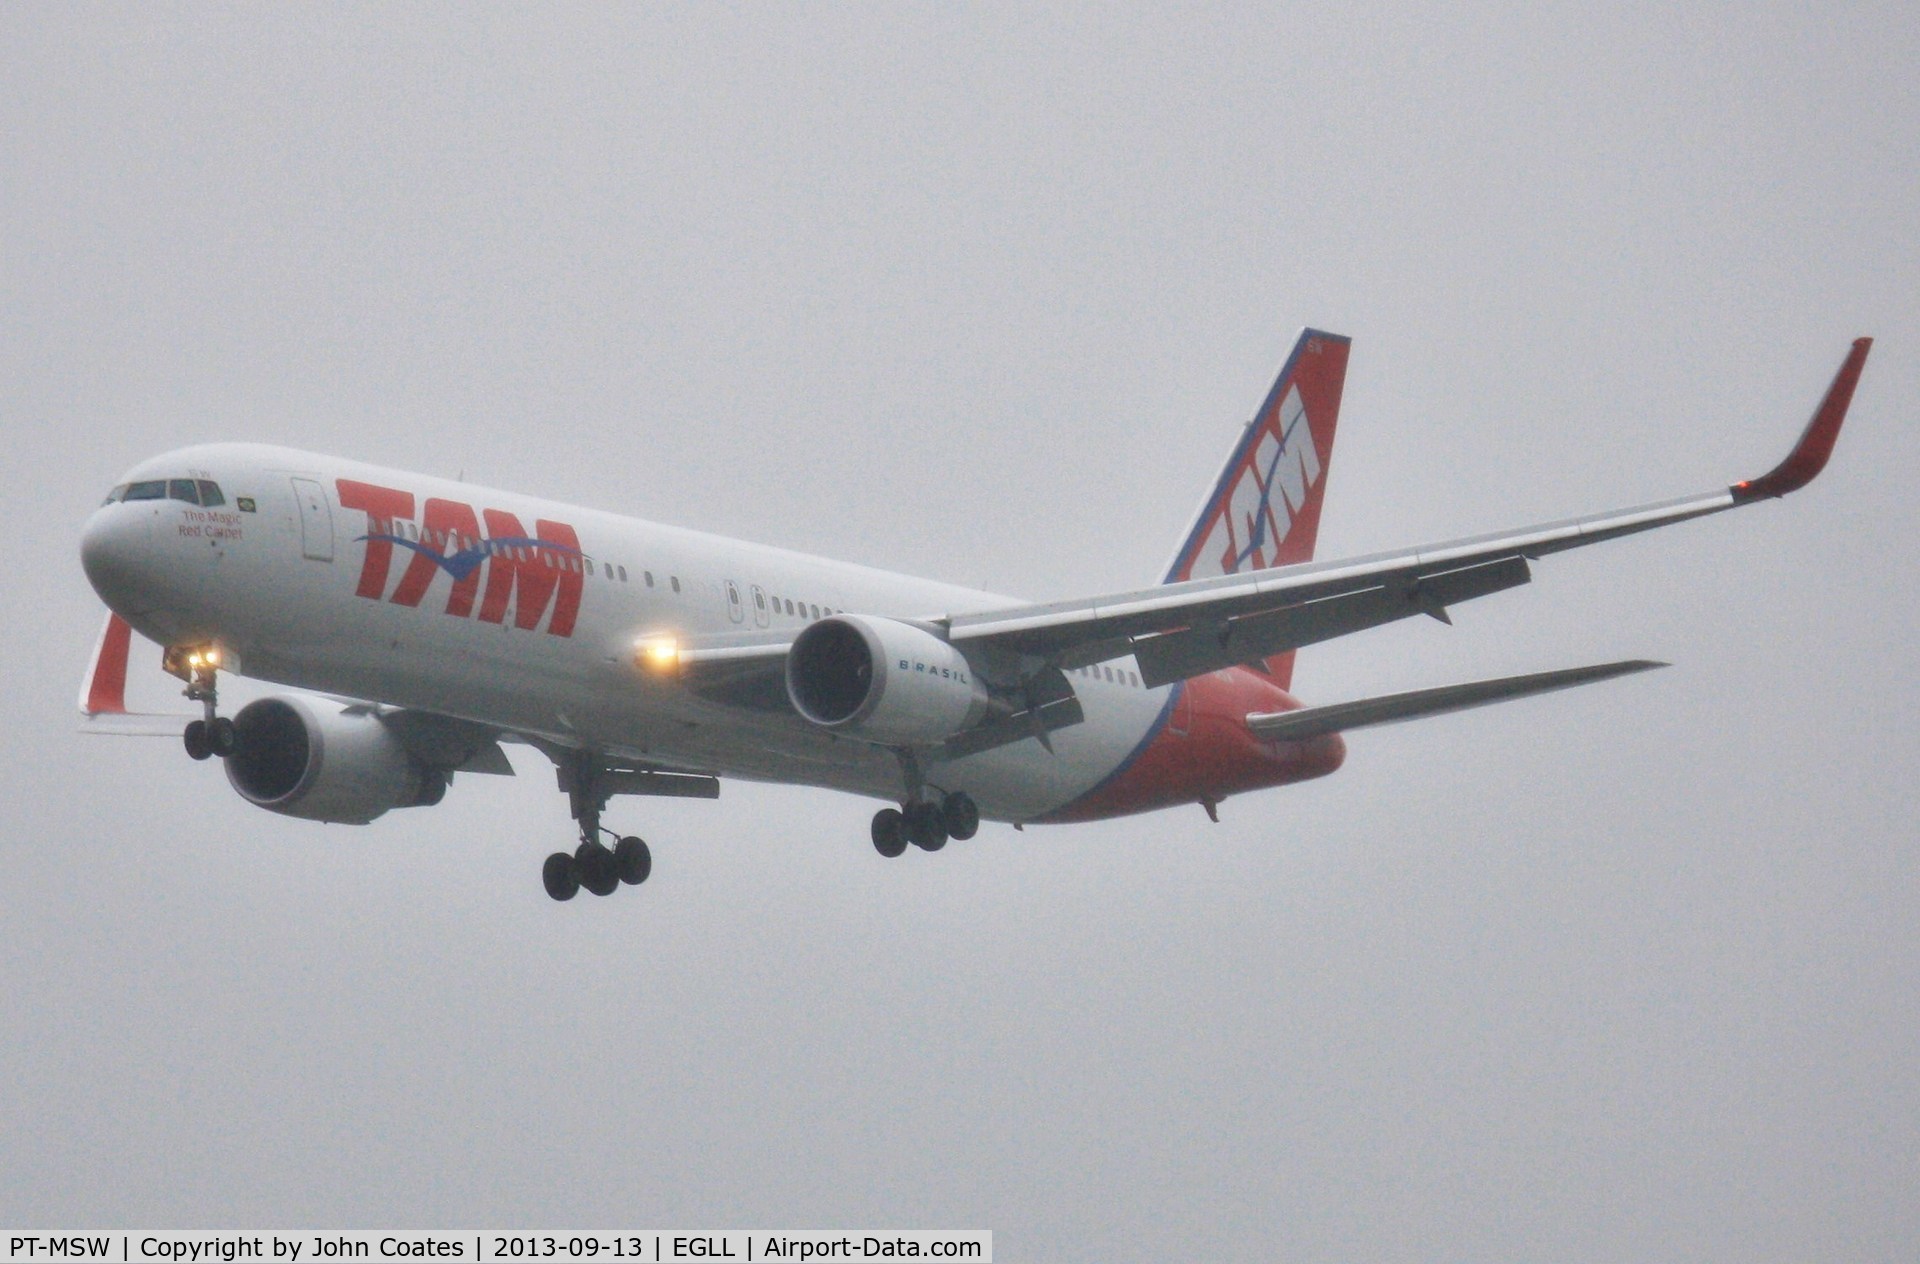 PT-MSW, 2012 Boeing 767-316/ER C/N 42213, Finals to 27L in heavy drizzle